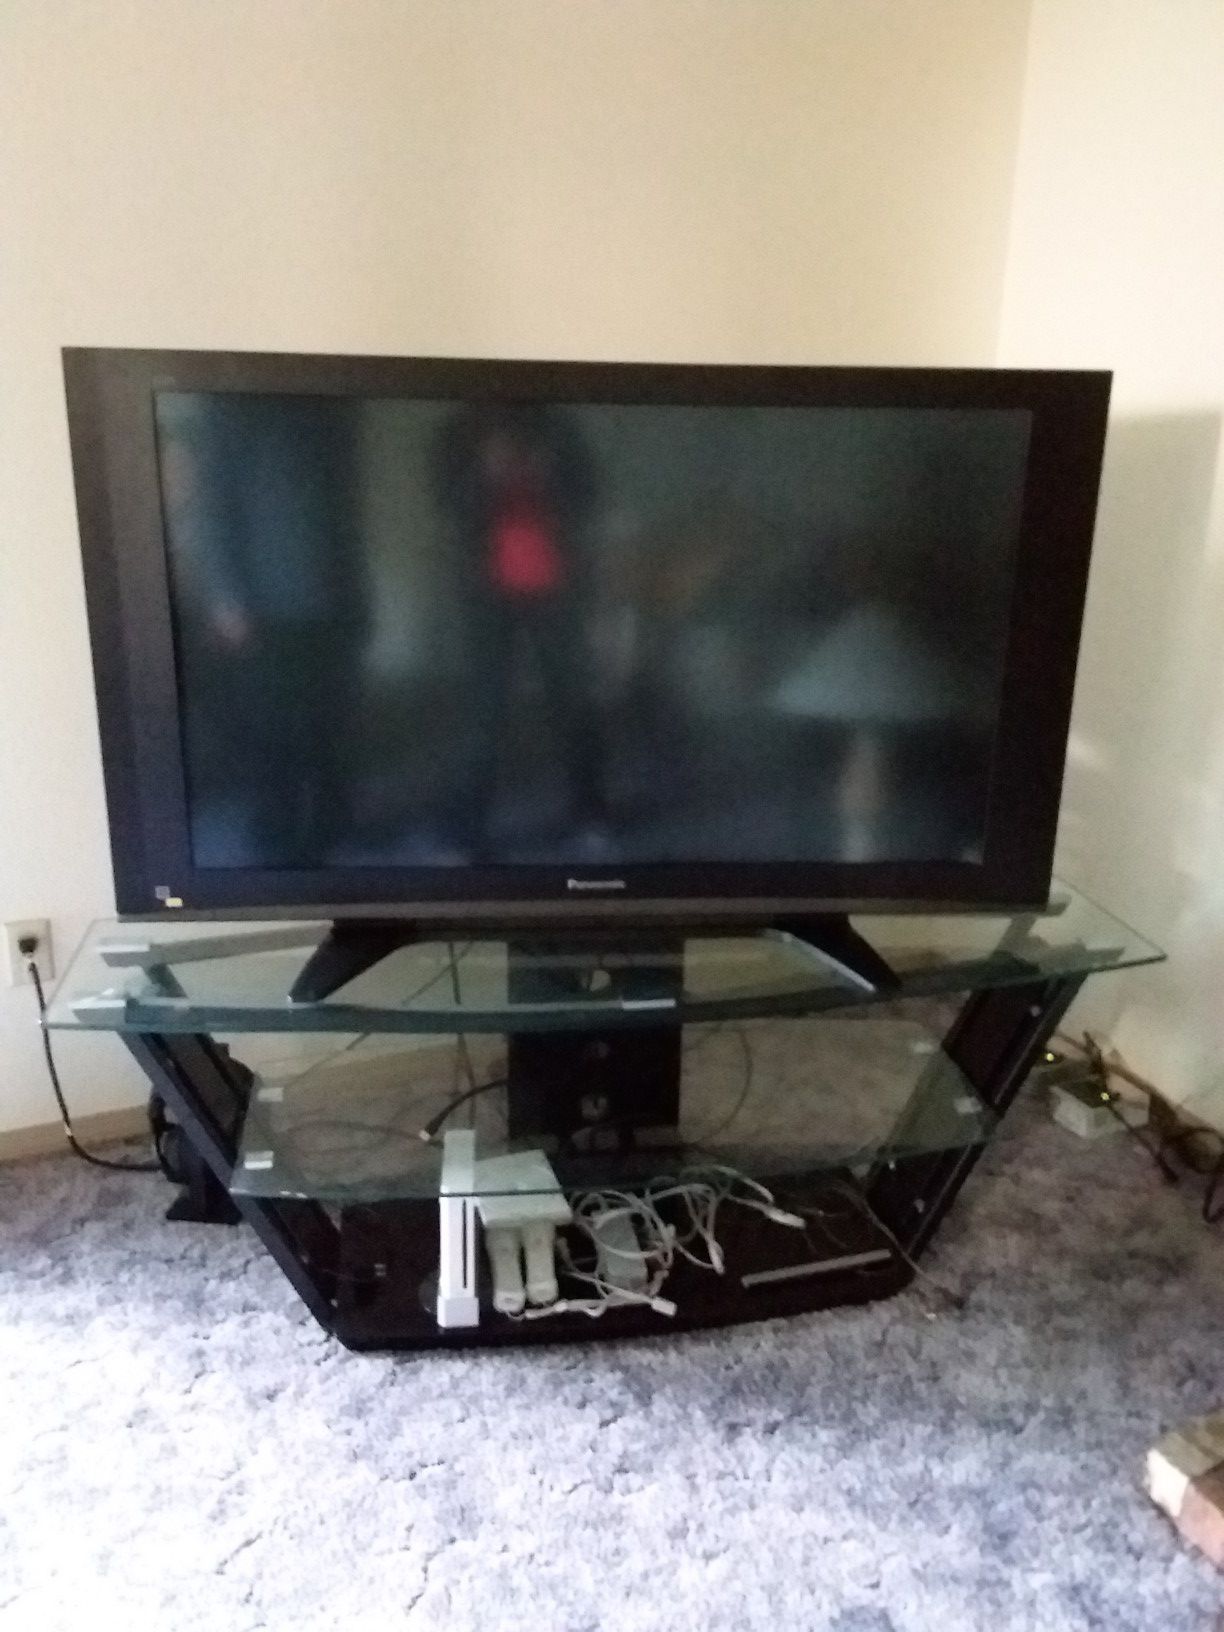 Panasonic tv with stand and a vii system with an extra golf cd